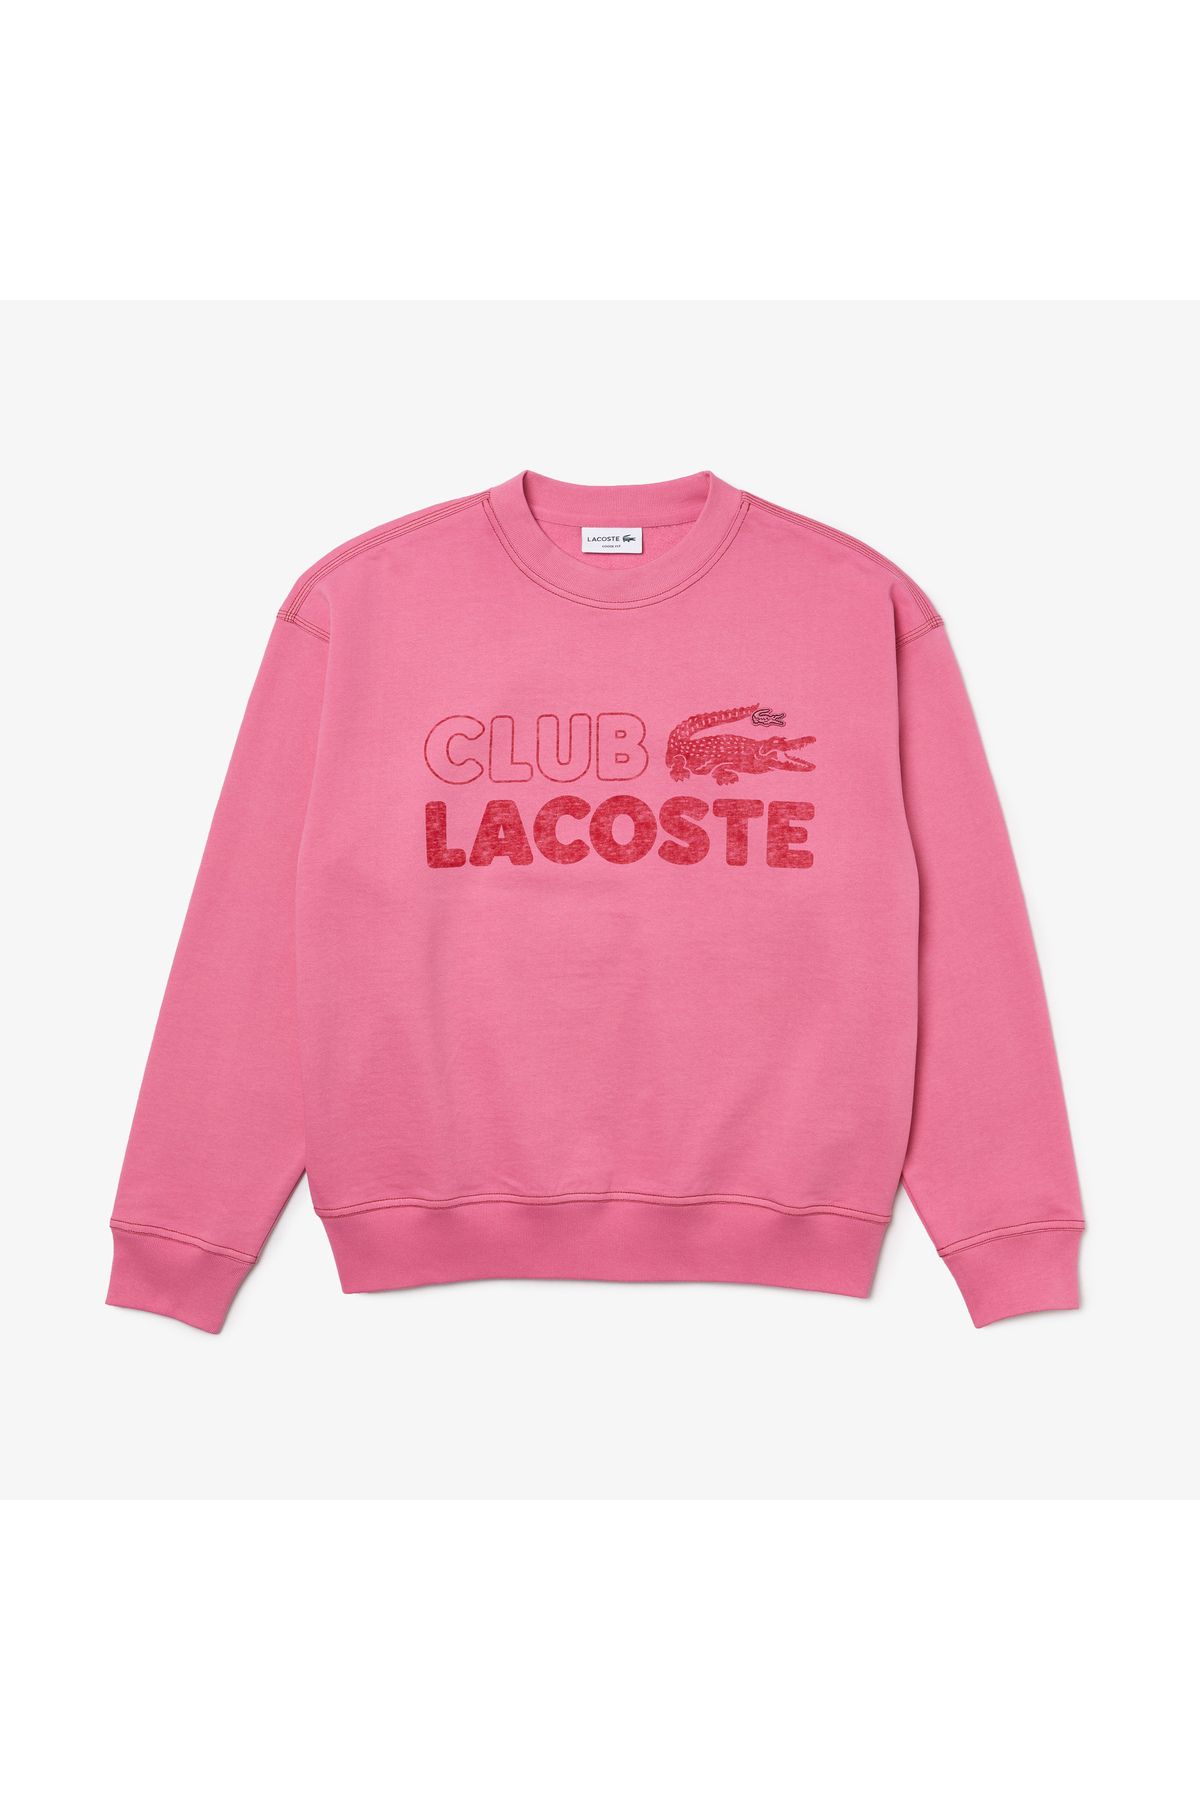 Lacoste Collar Fit Loose